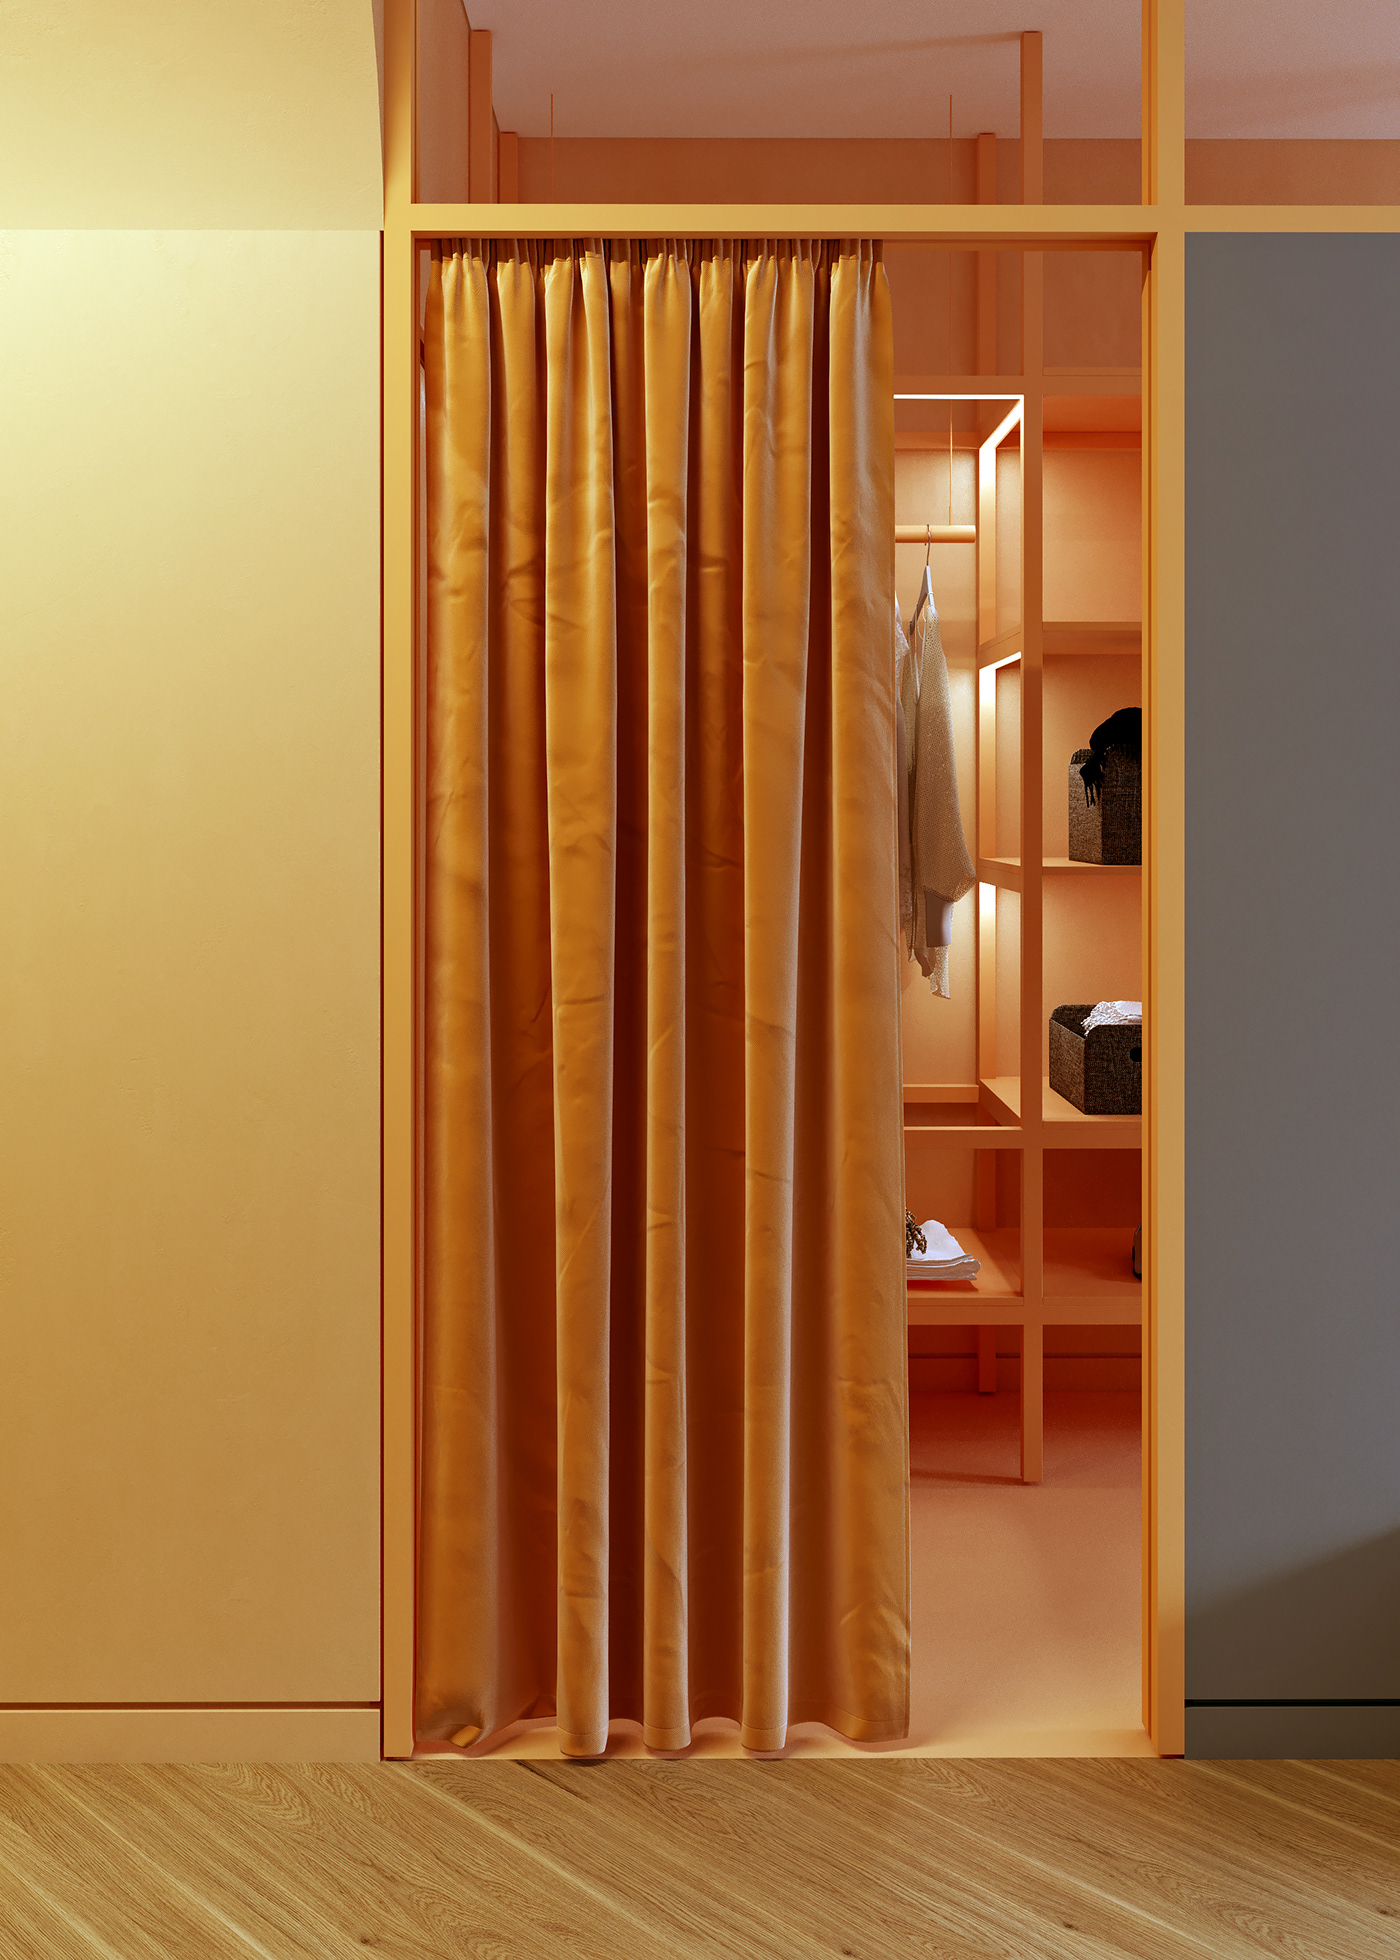 Instead of a door, a curtain is used to provide privacy without restricting the space.